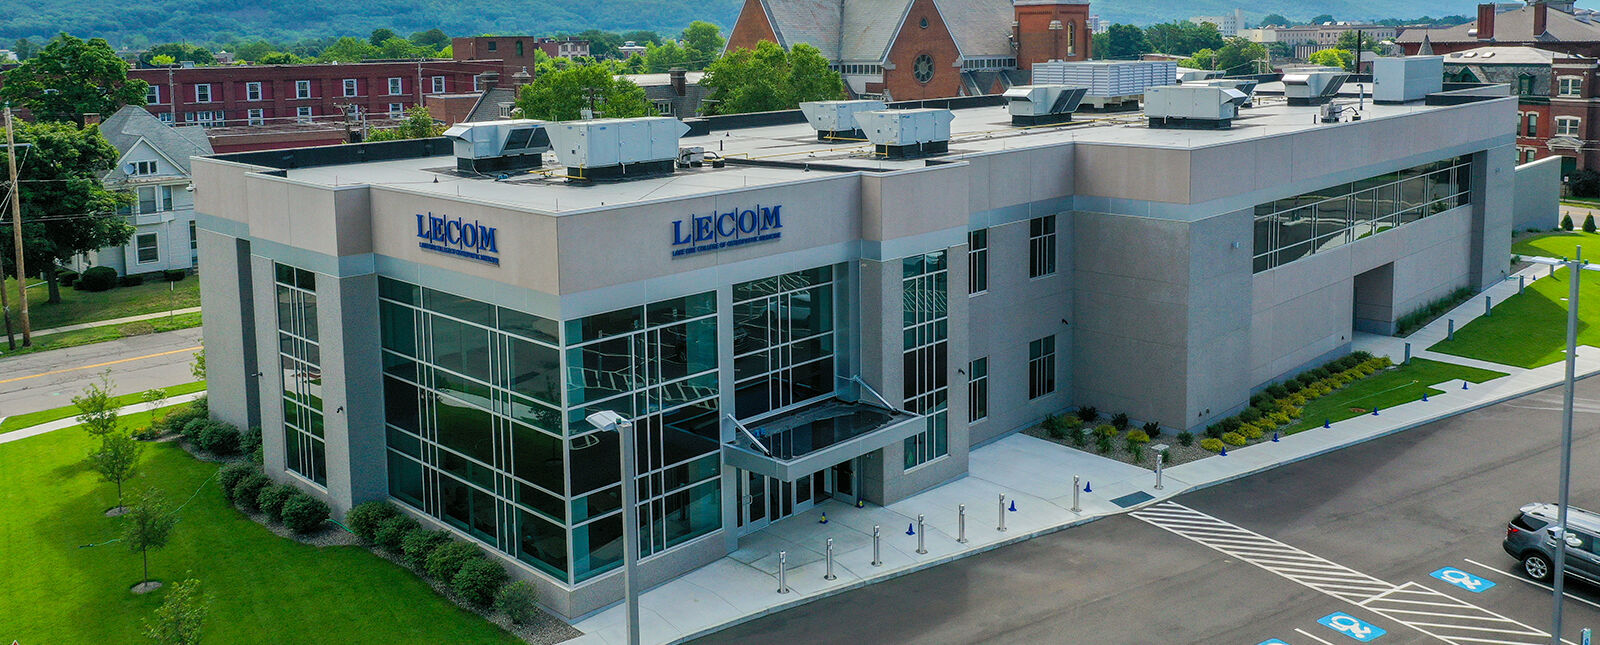 An overview of the LECOM building